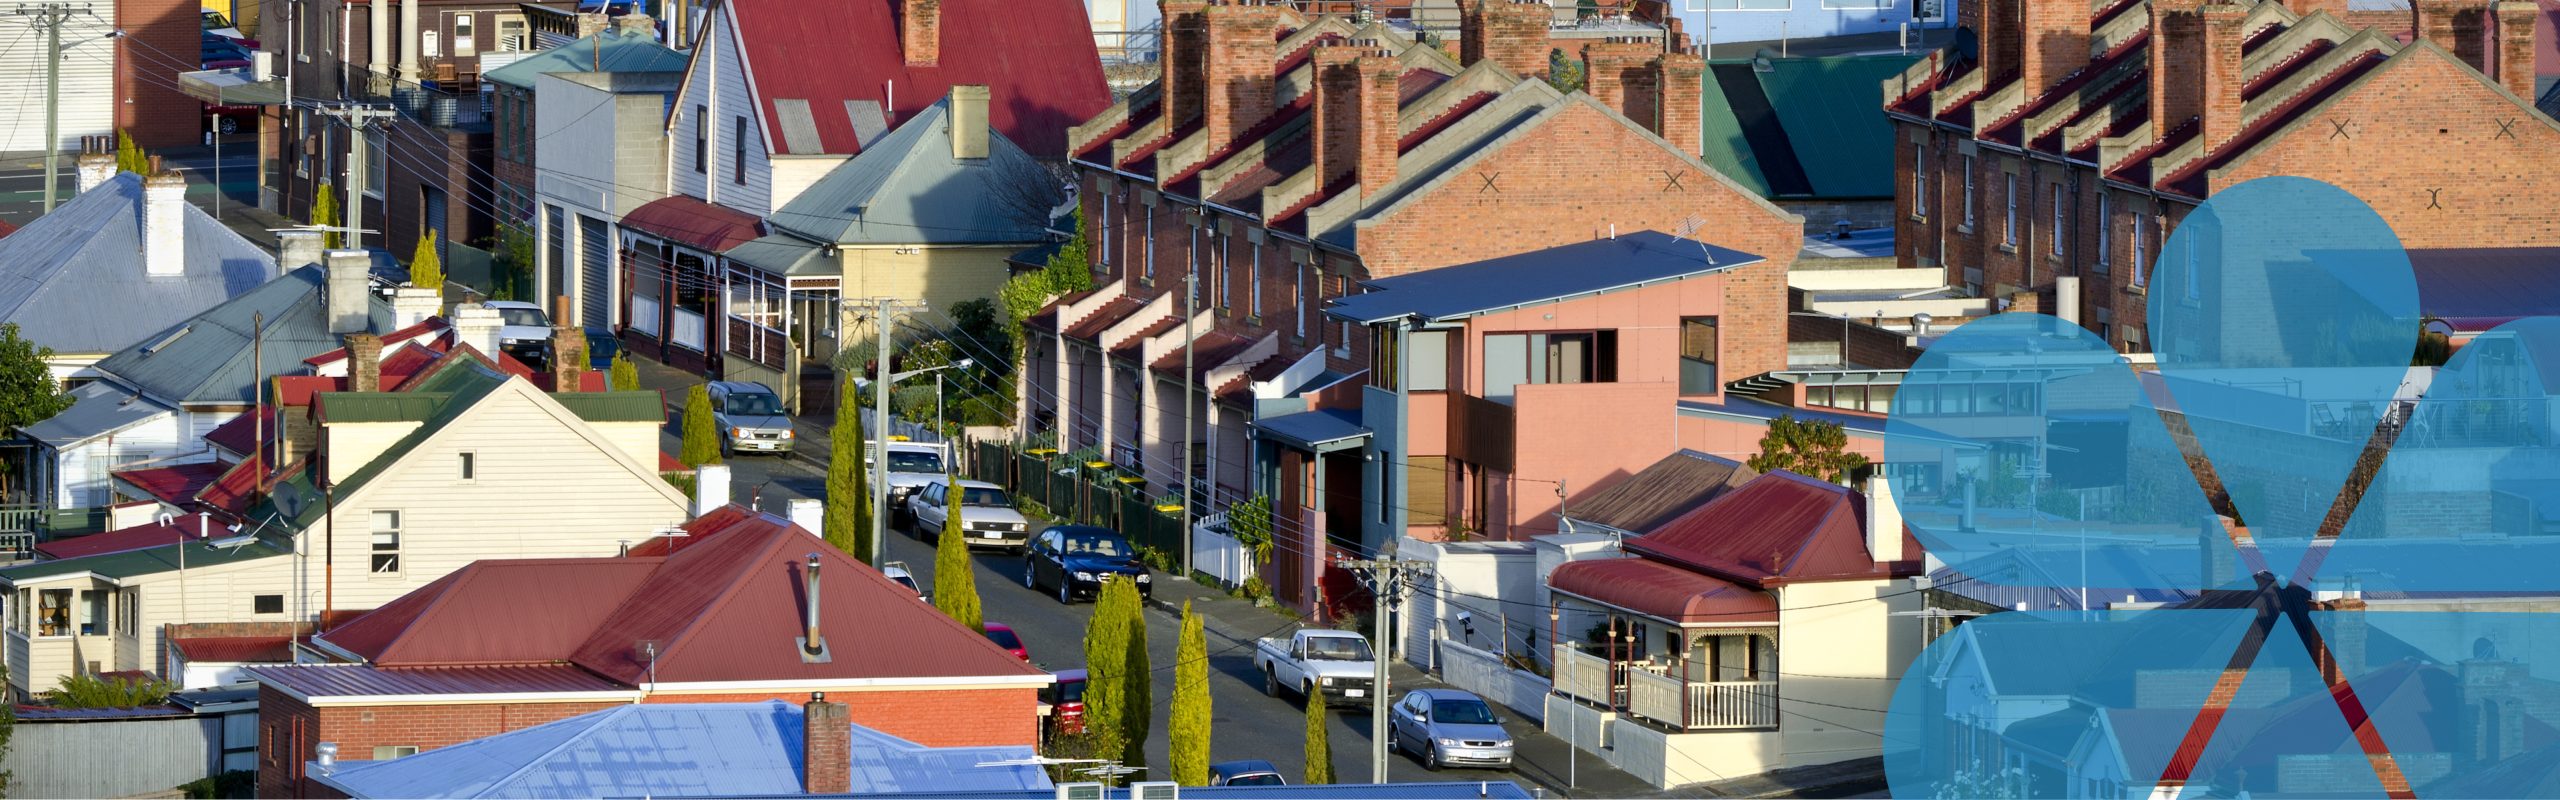 a view of a street with lots of houses